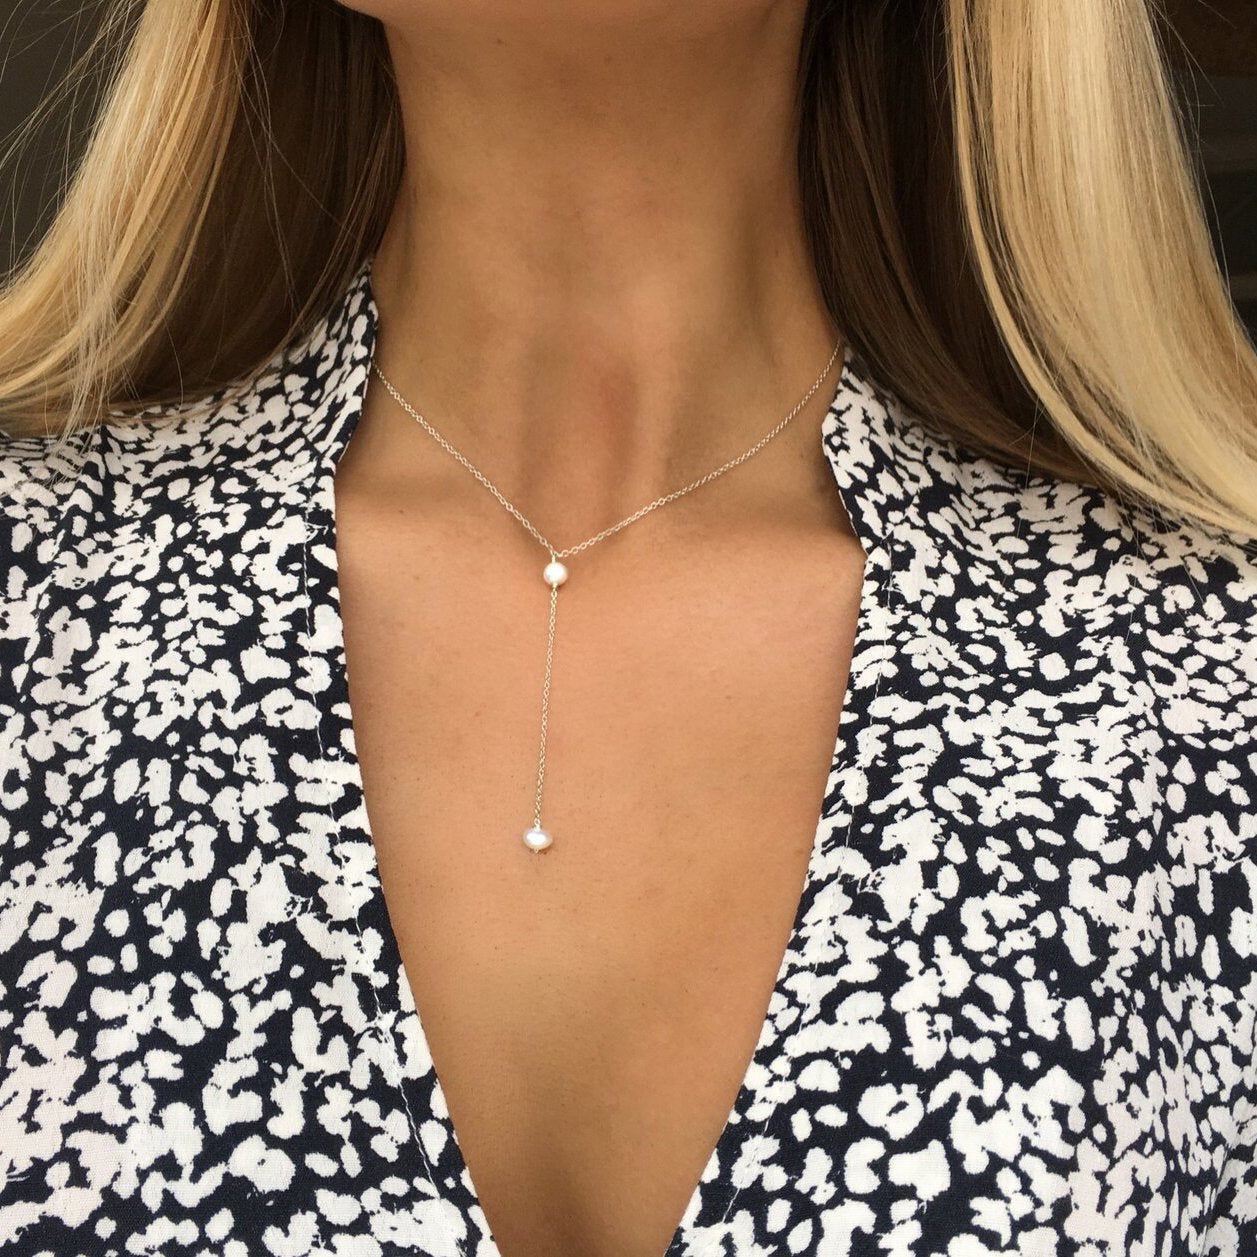 Gold pearl lariat necklace around the neck of a blonde woman wearing a black shirt with white spots